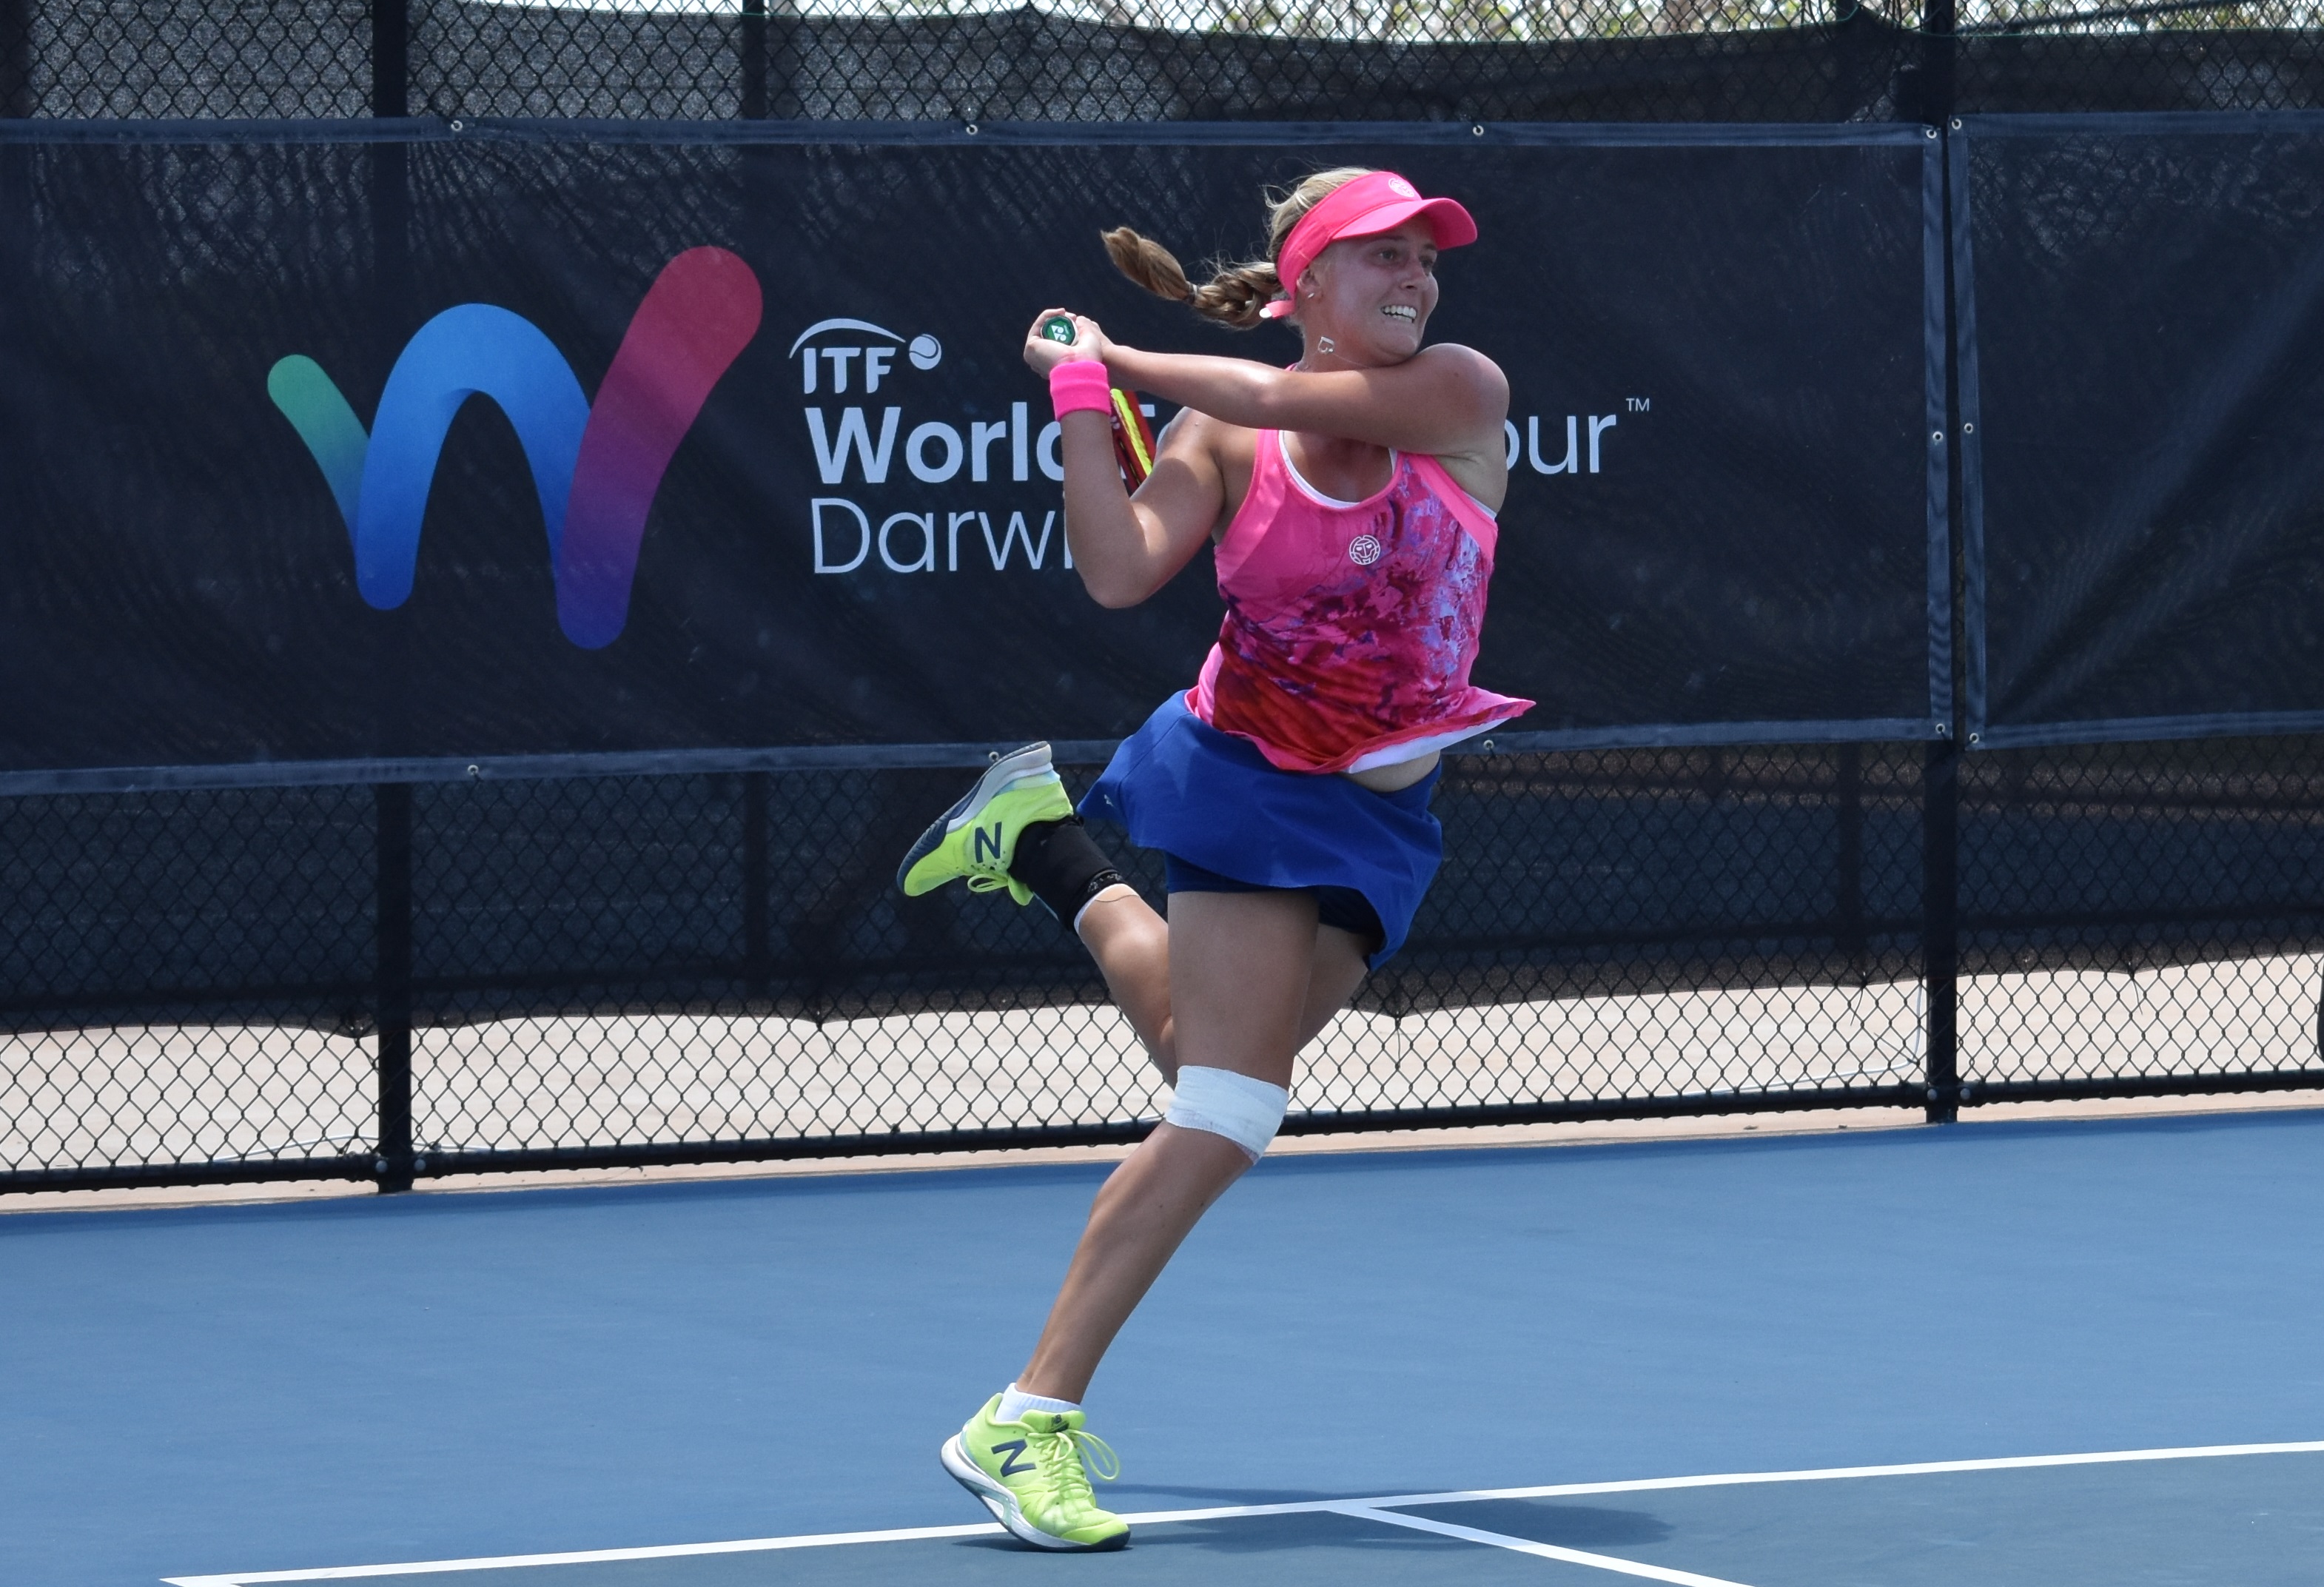 Hives eases through in Darwin 26 September, 2019 All News News and Features News and Events Tennis Australia